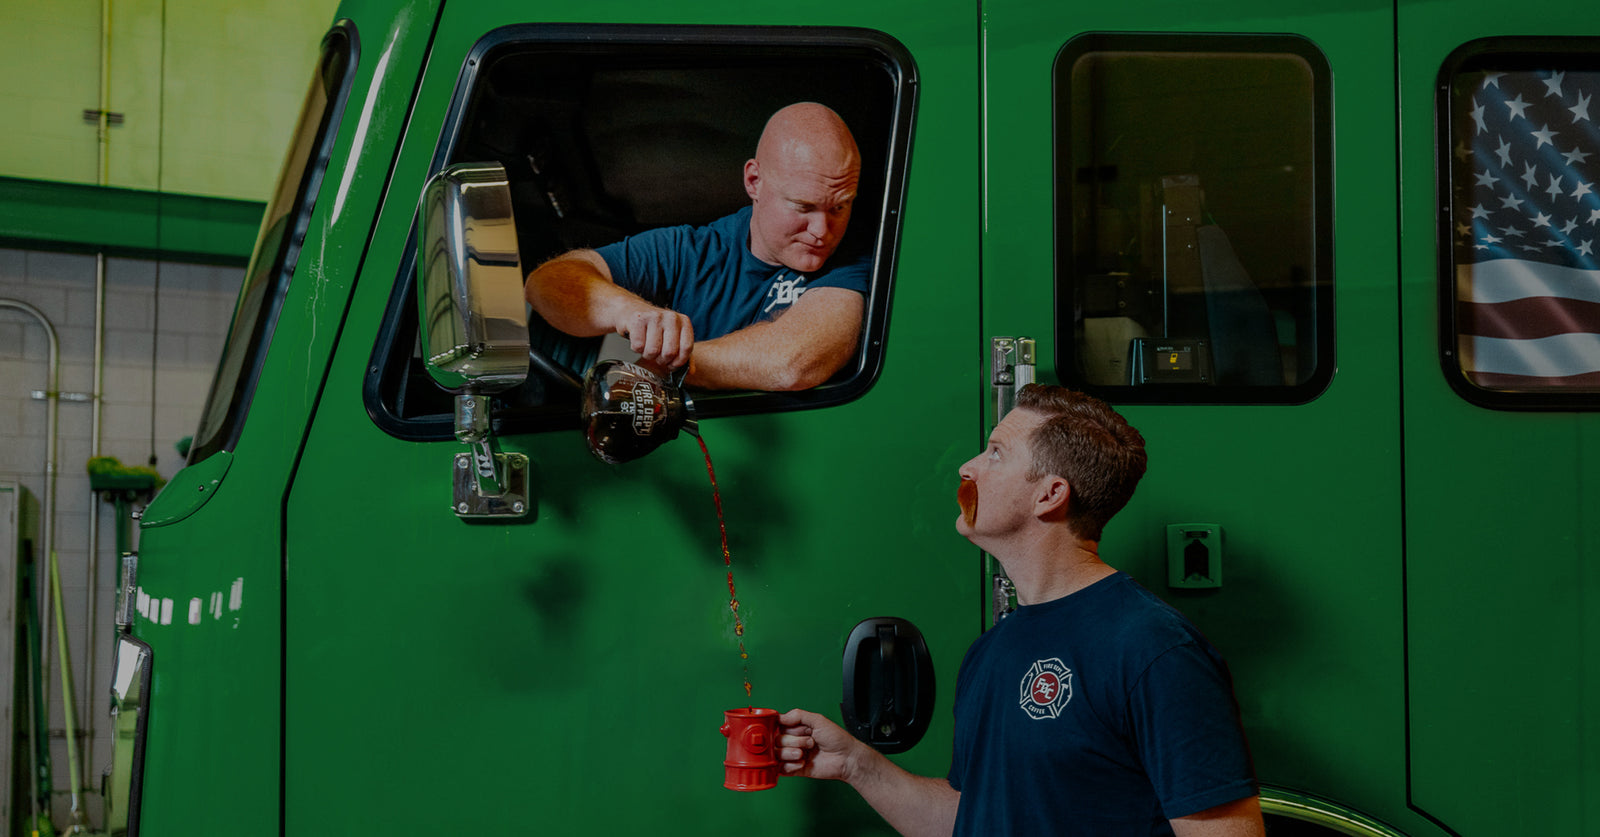 Jason Patton pouring coffee from a fire truck into a mug Firefighter Fenton is holding.